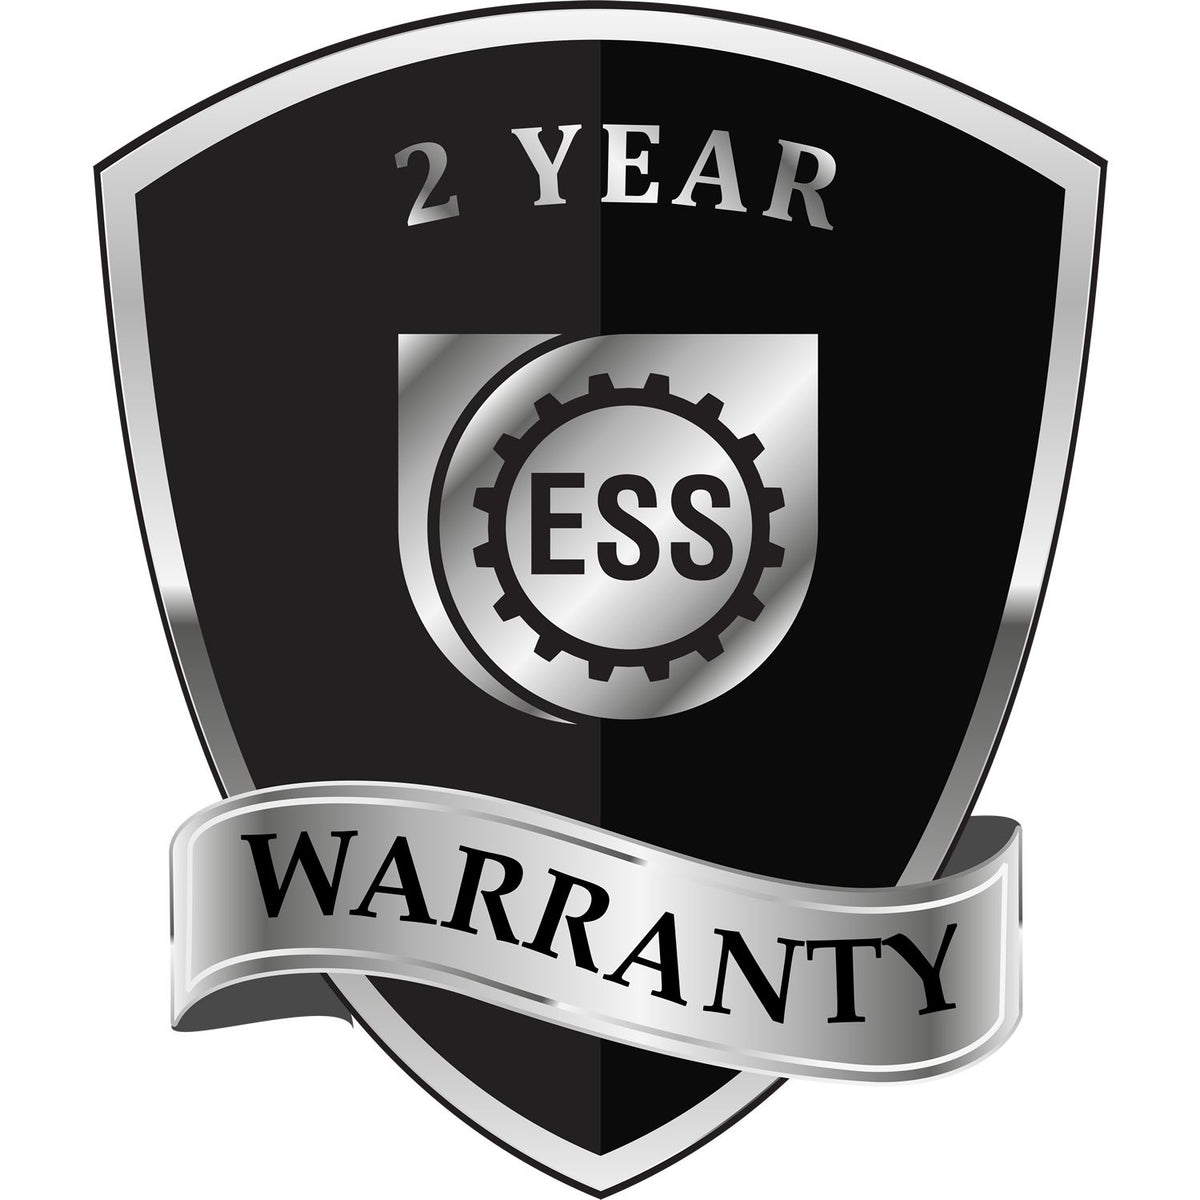 A badge or emblem showing a warranty icon for the Heavy Duty Cast Iron Mississippi Land Surveyor Seal Embosser